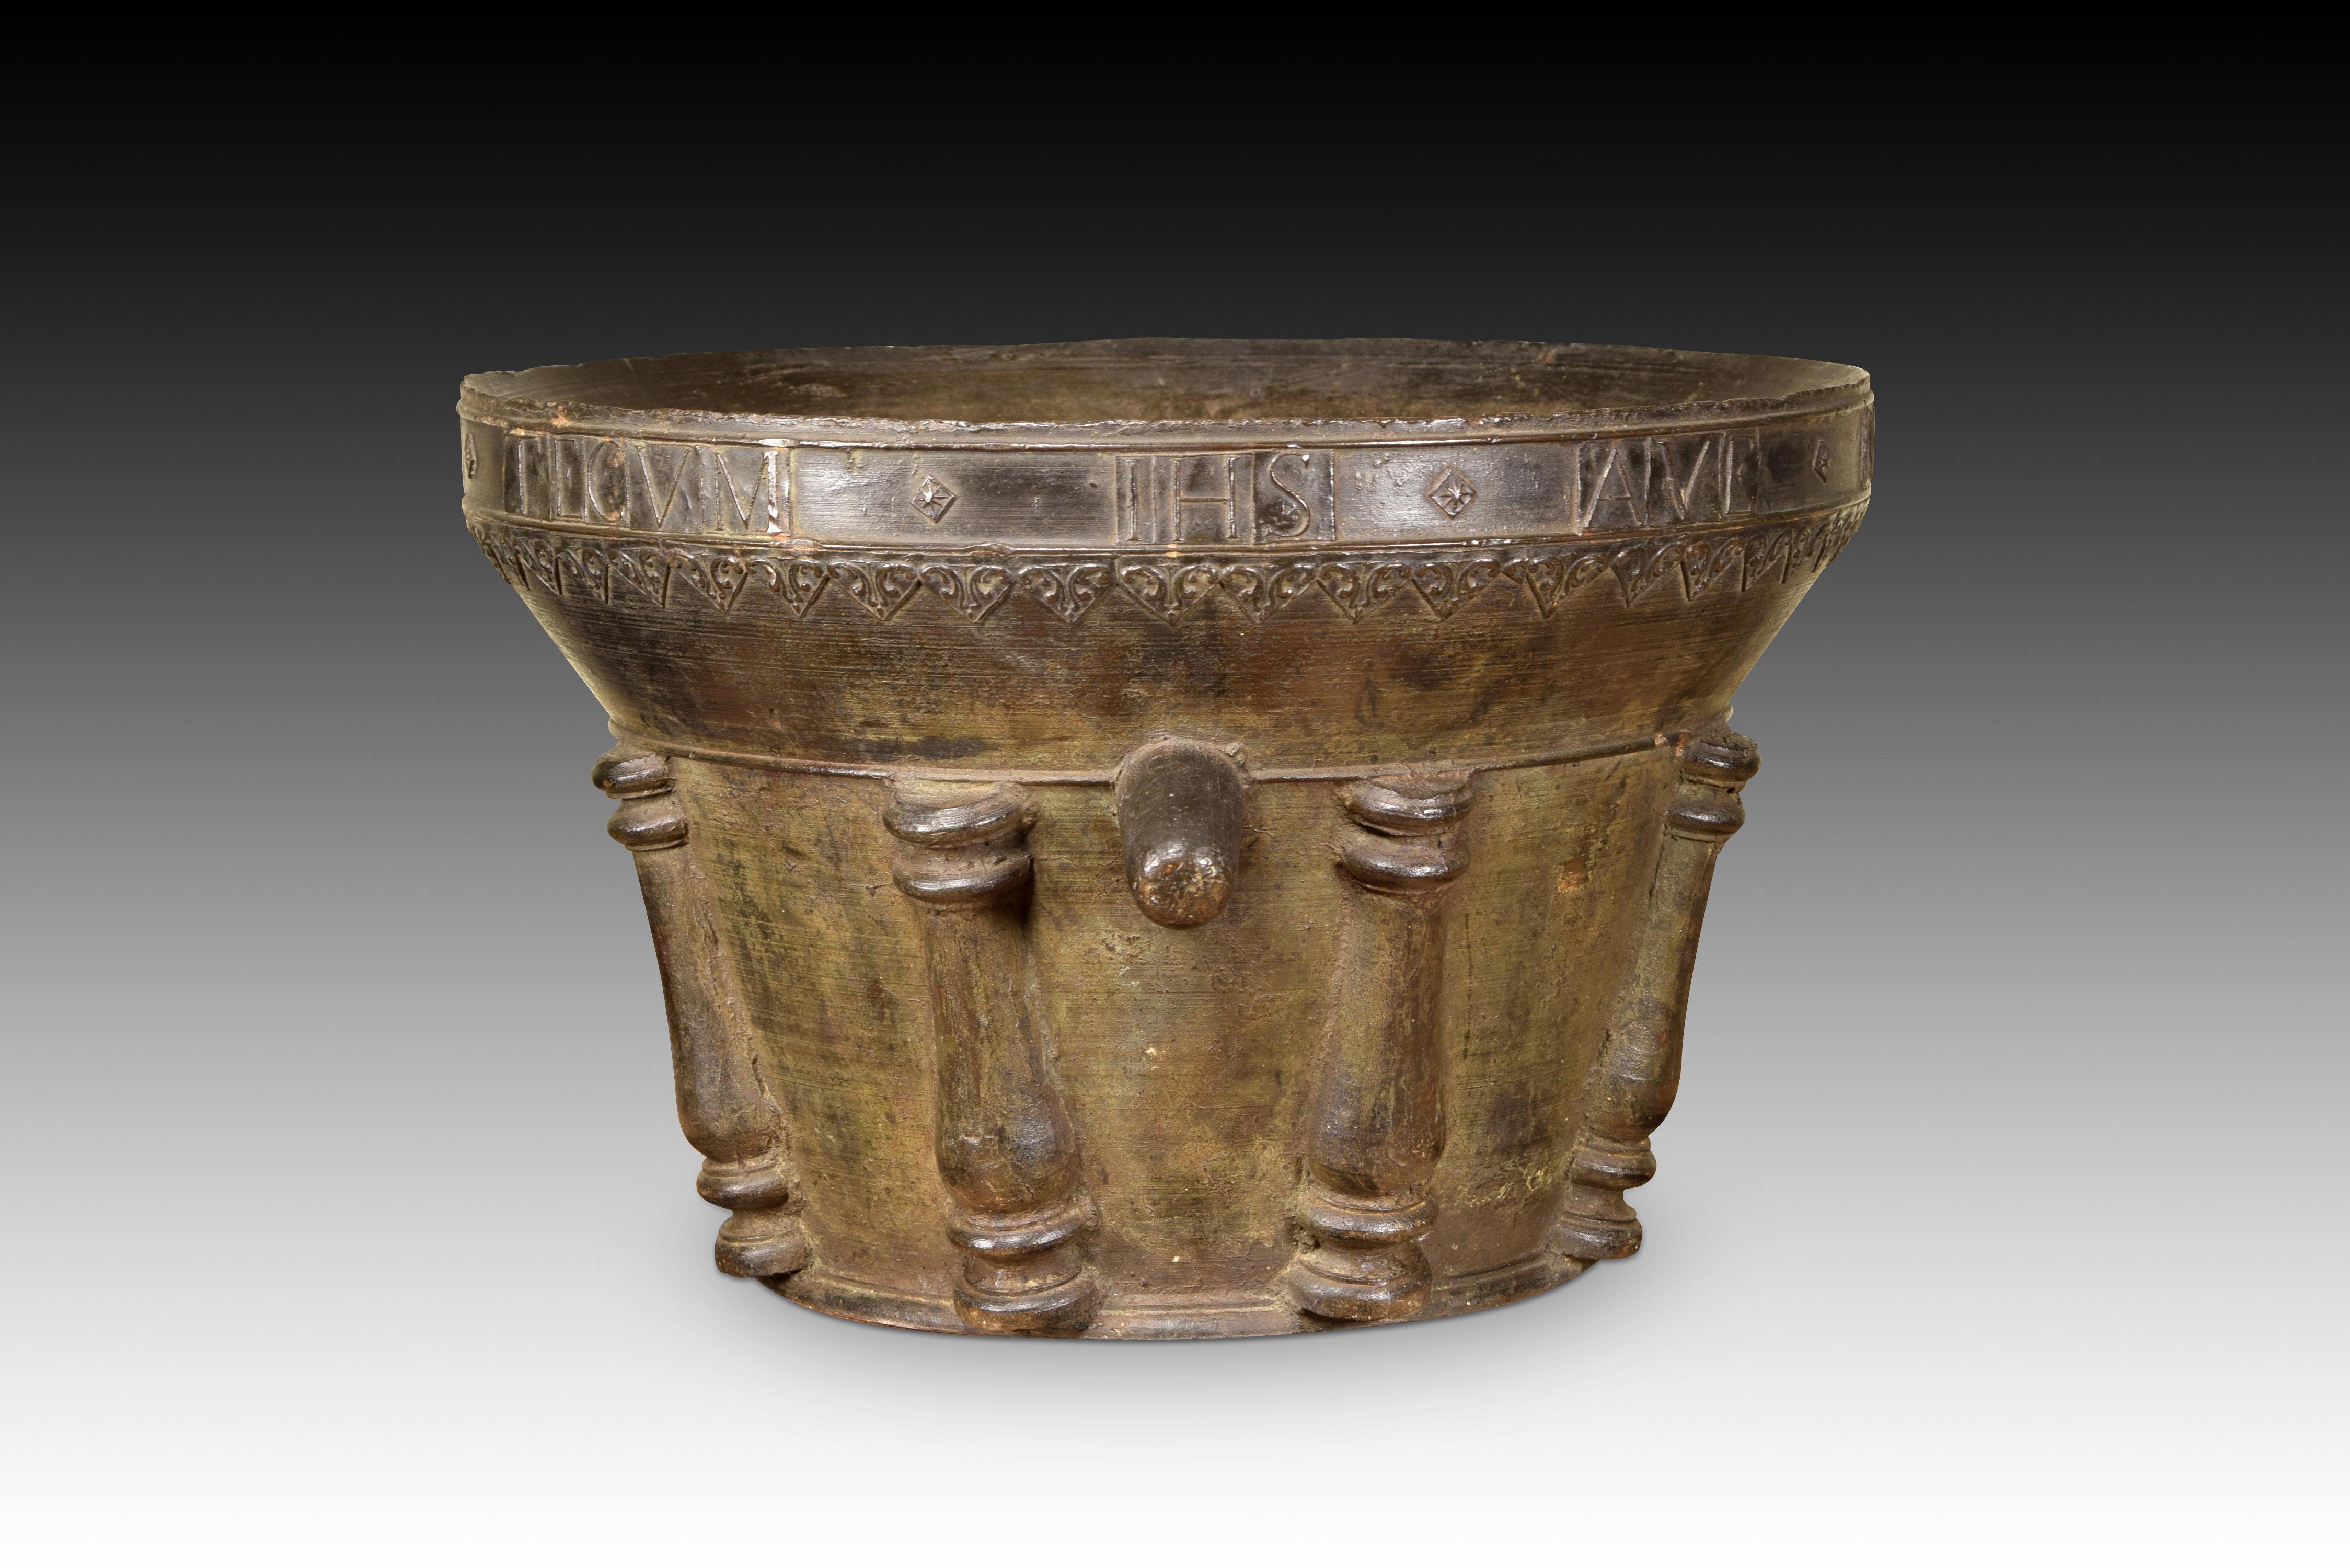 Pharmacy mortar. Bronze. Spain, dated in the piece. 
Pharmacy mortar made in bronze with mouth exvased to the outside from the last third of the piece with the upper part straight to the outside, and frustoconical body (developed in a slight